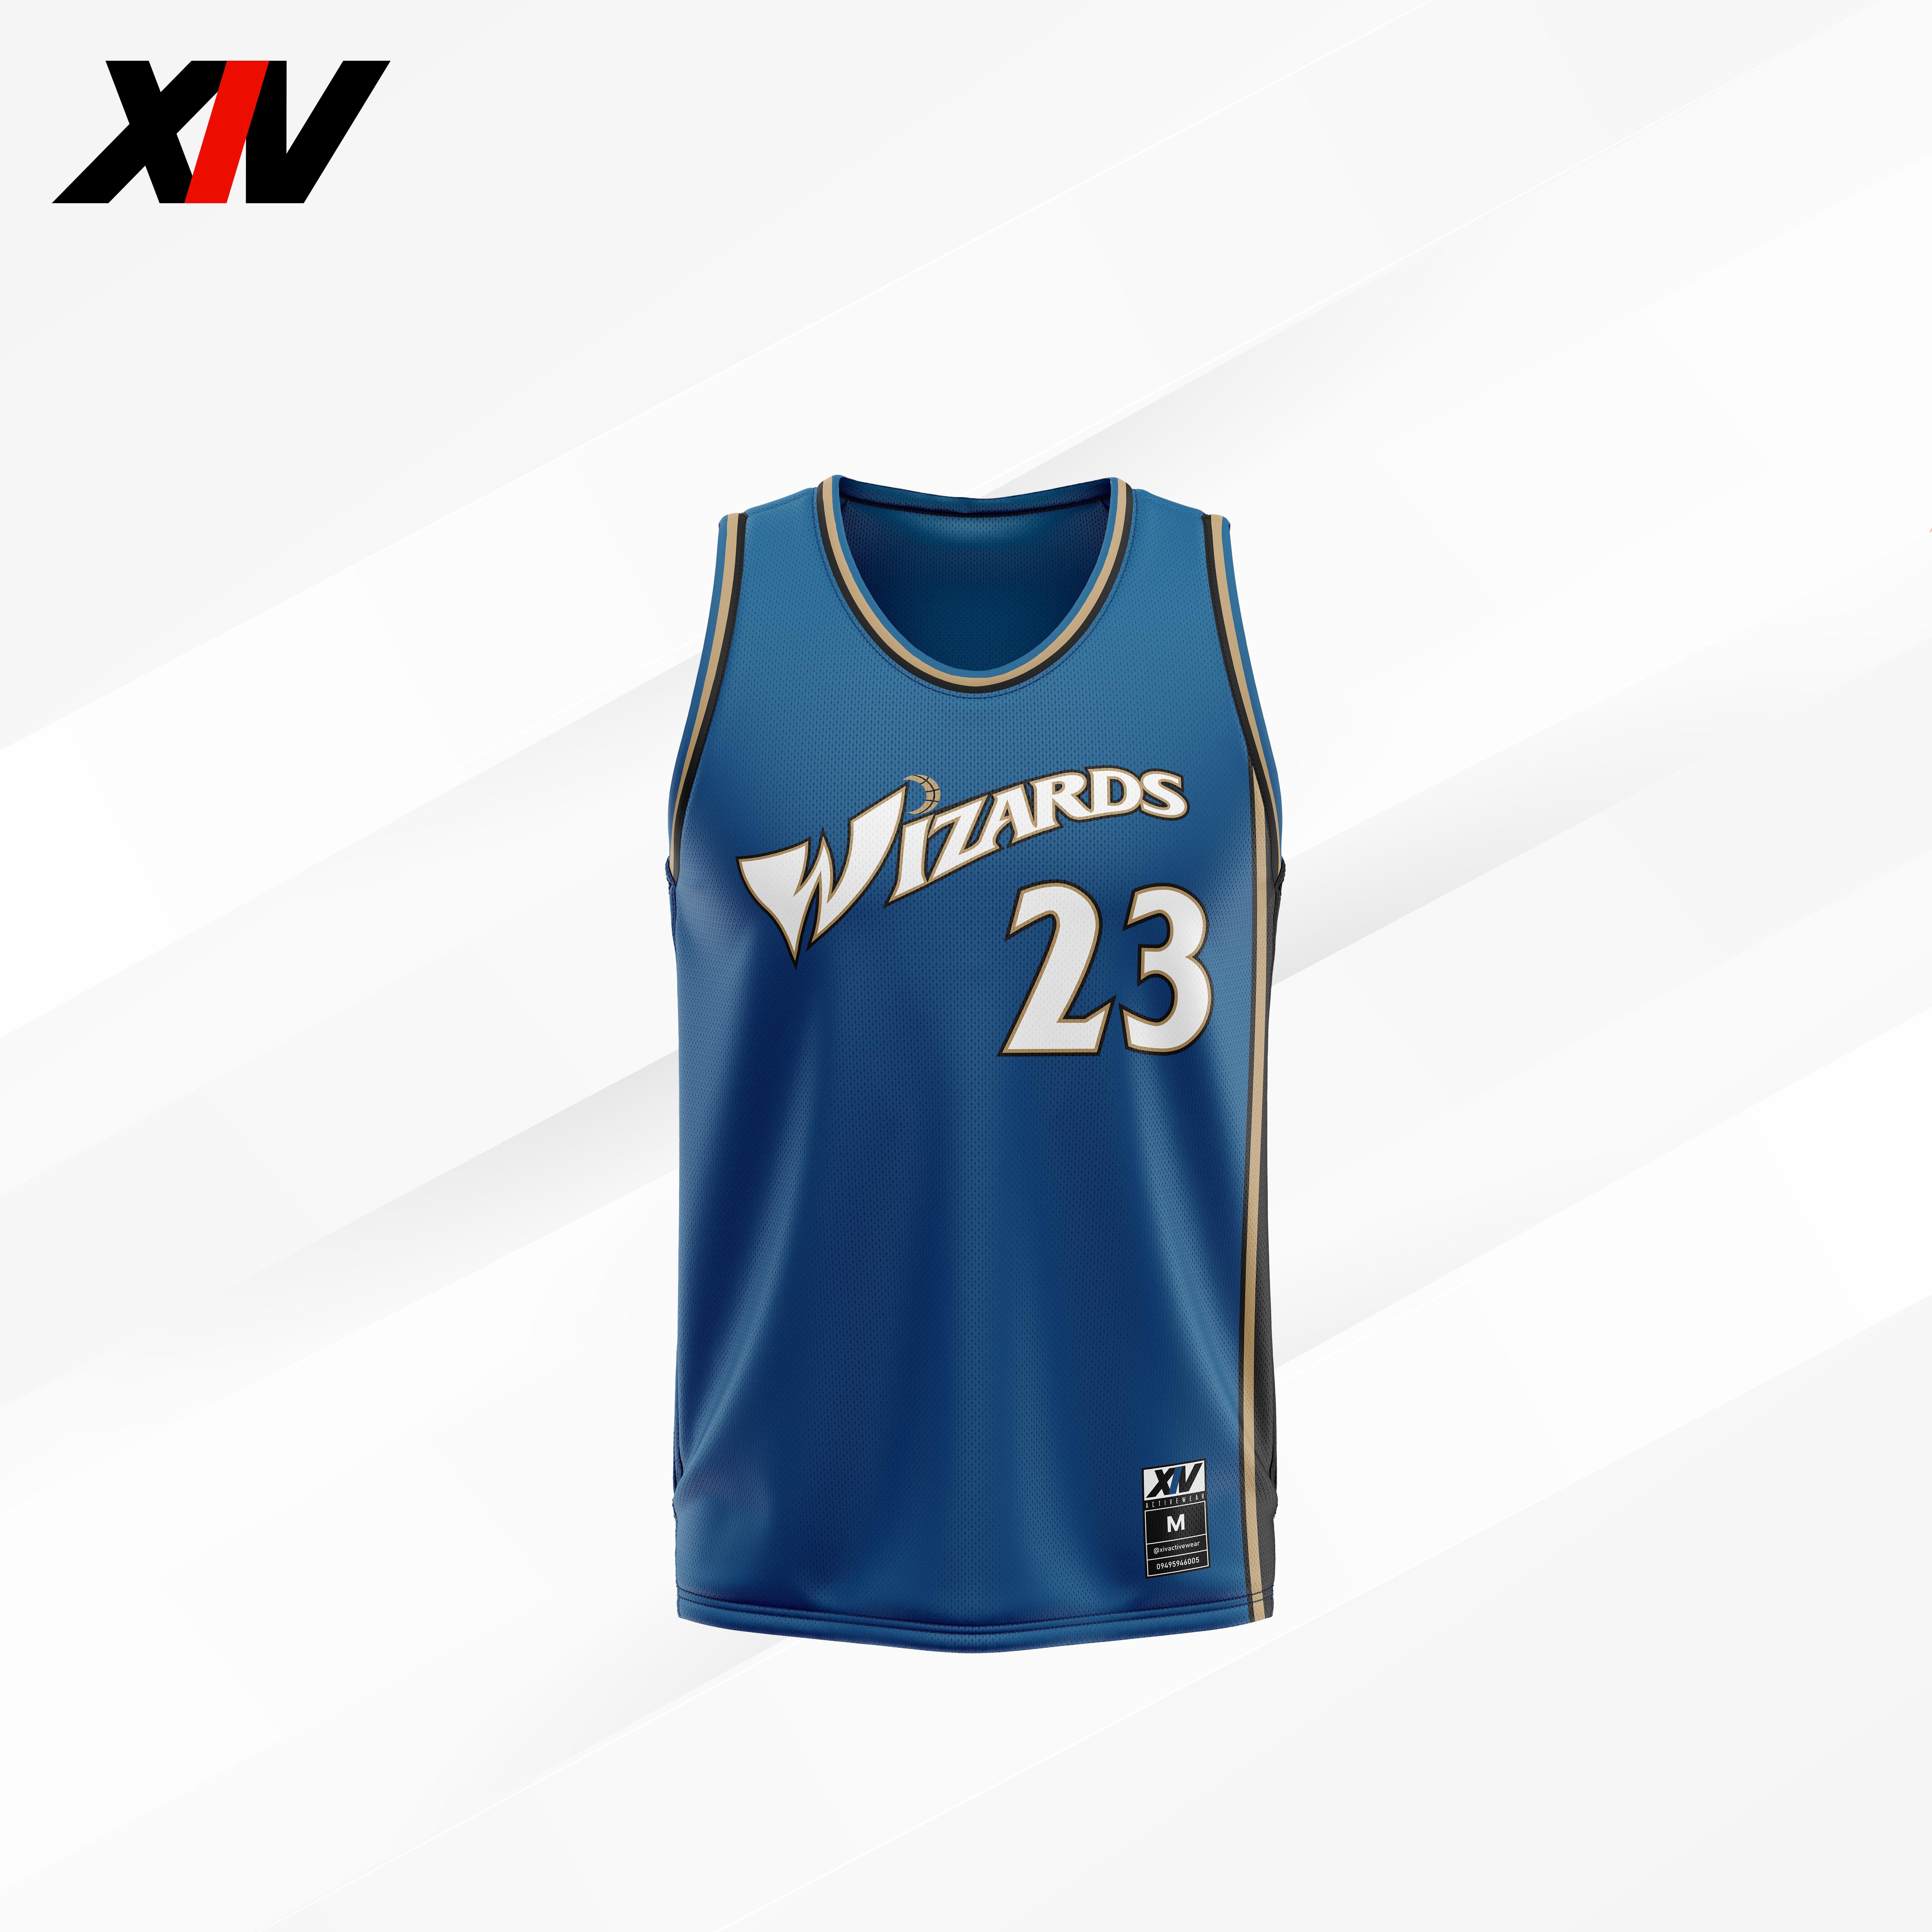 wizards jersey blue